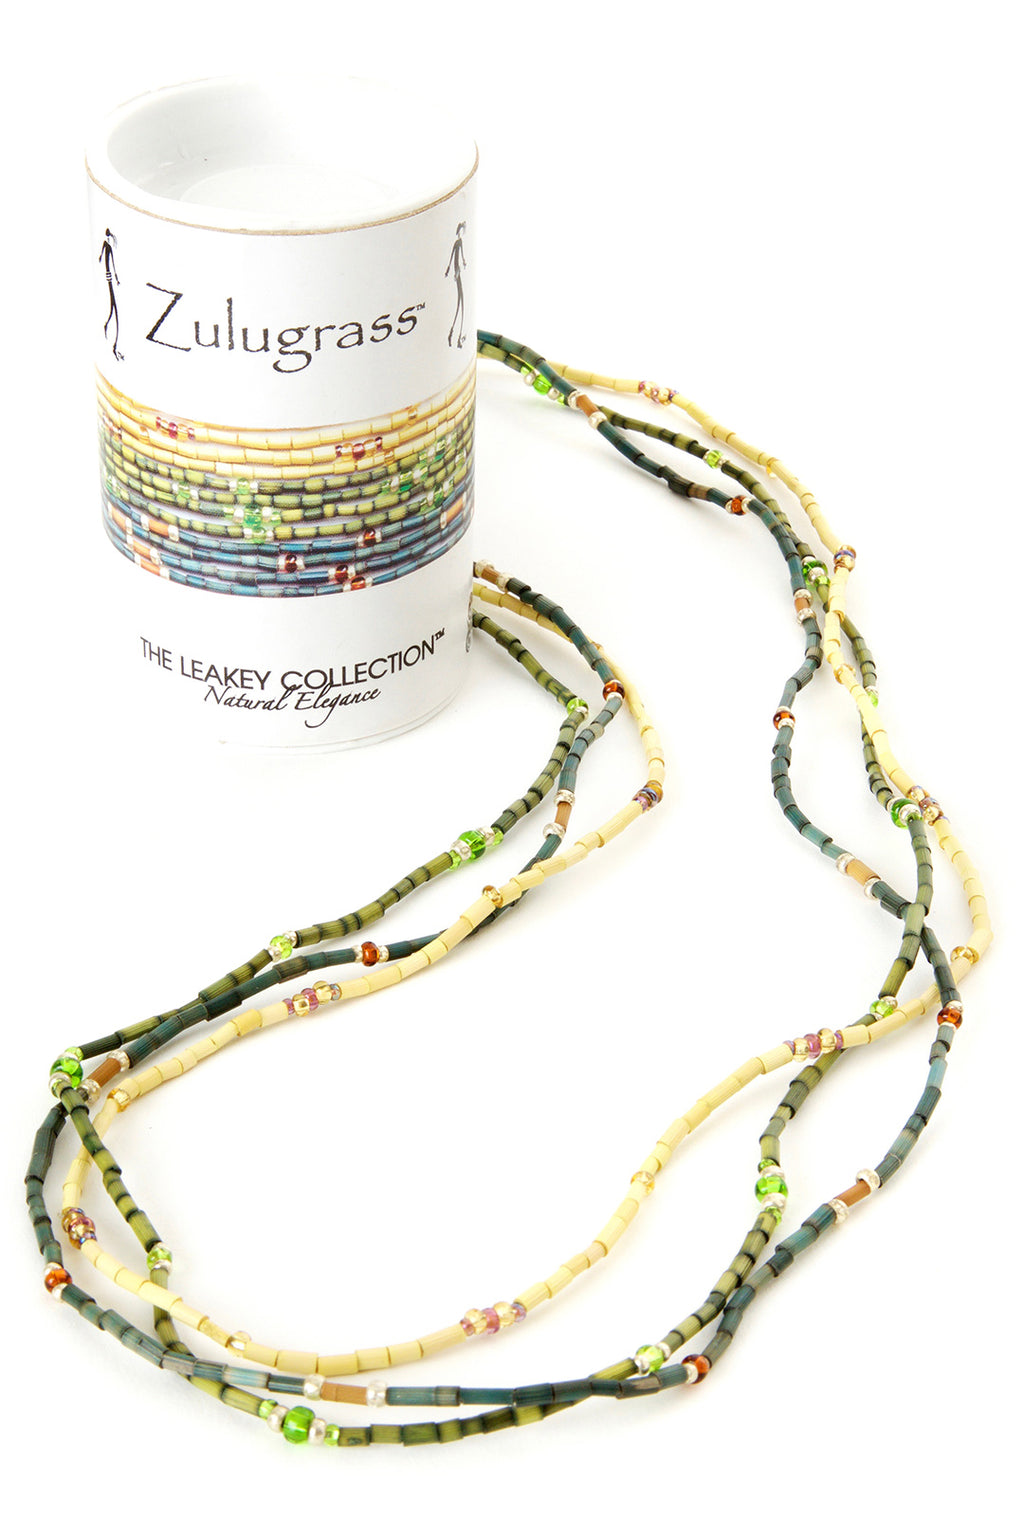 The Leakey Collection Zulugrass for Nature Girls Default Title